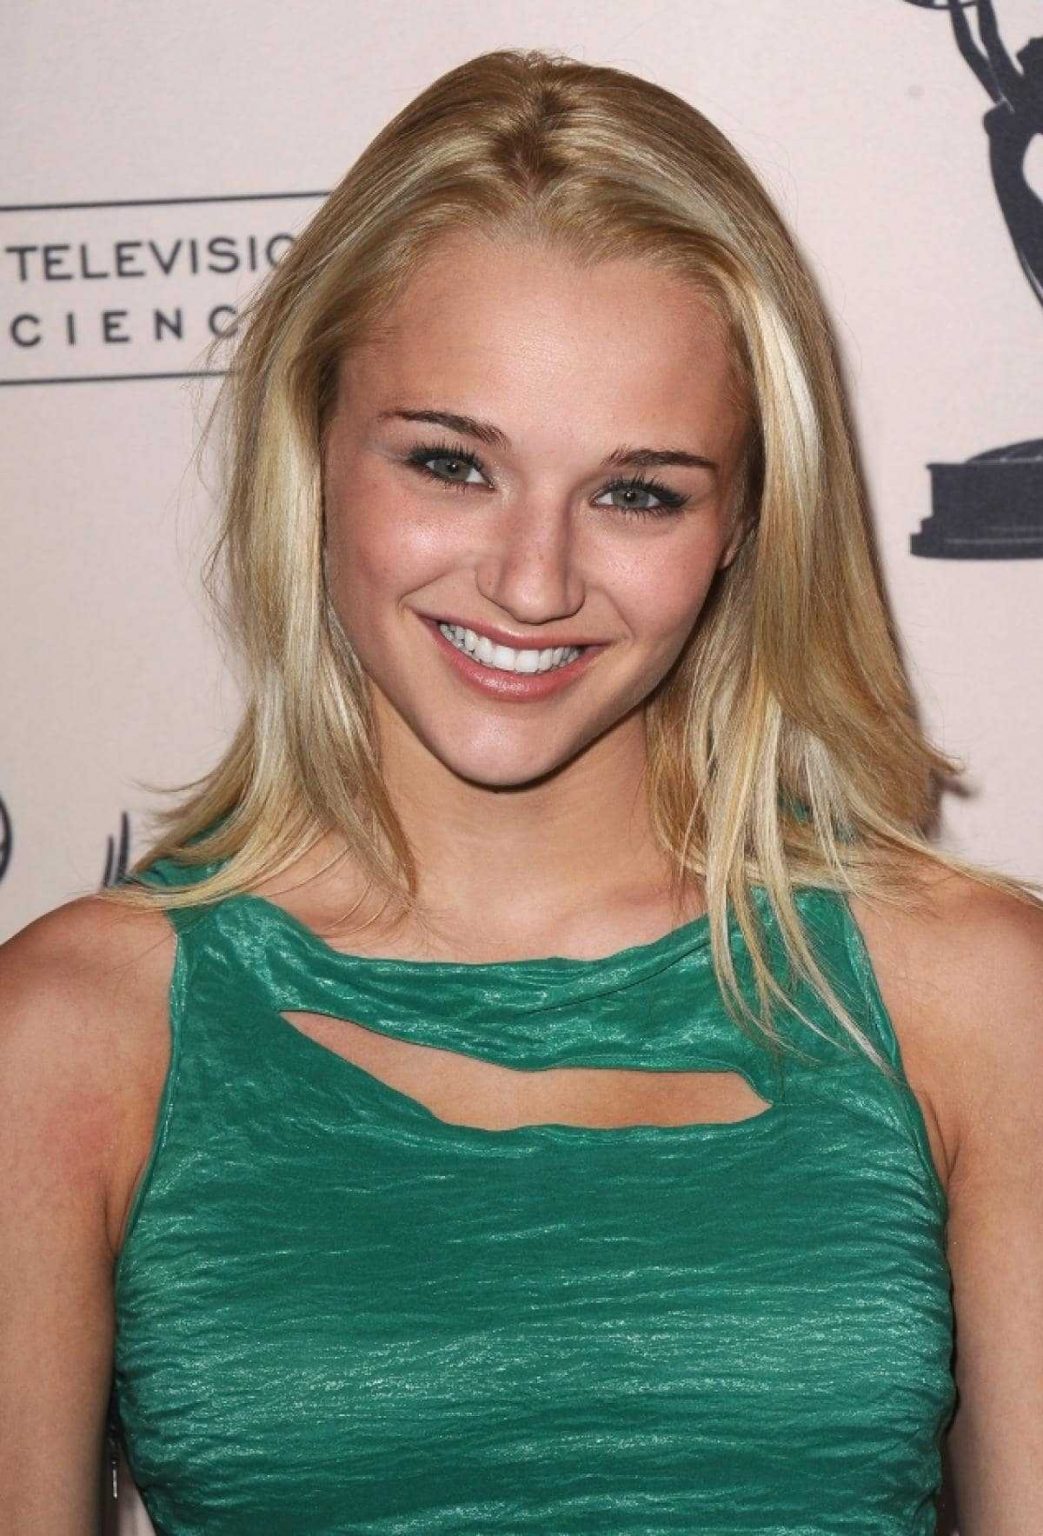 51 Hunter King Nude Pictures Display Her As A Skilled Performer 72